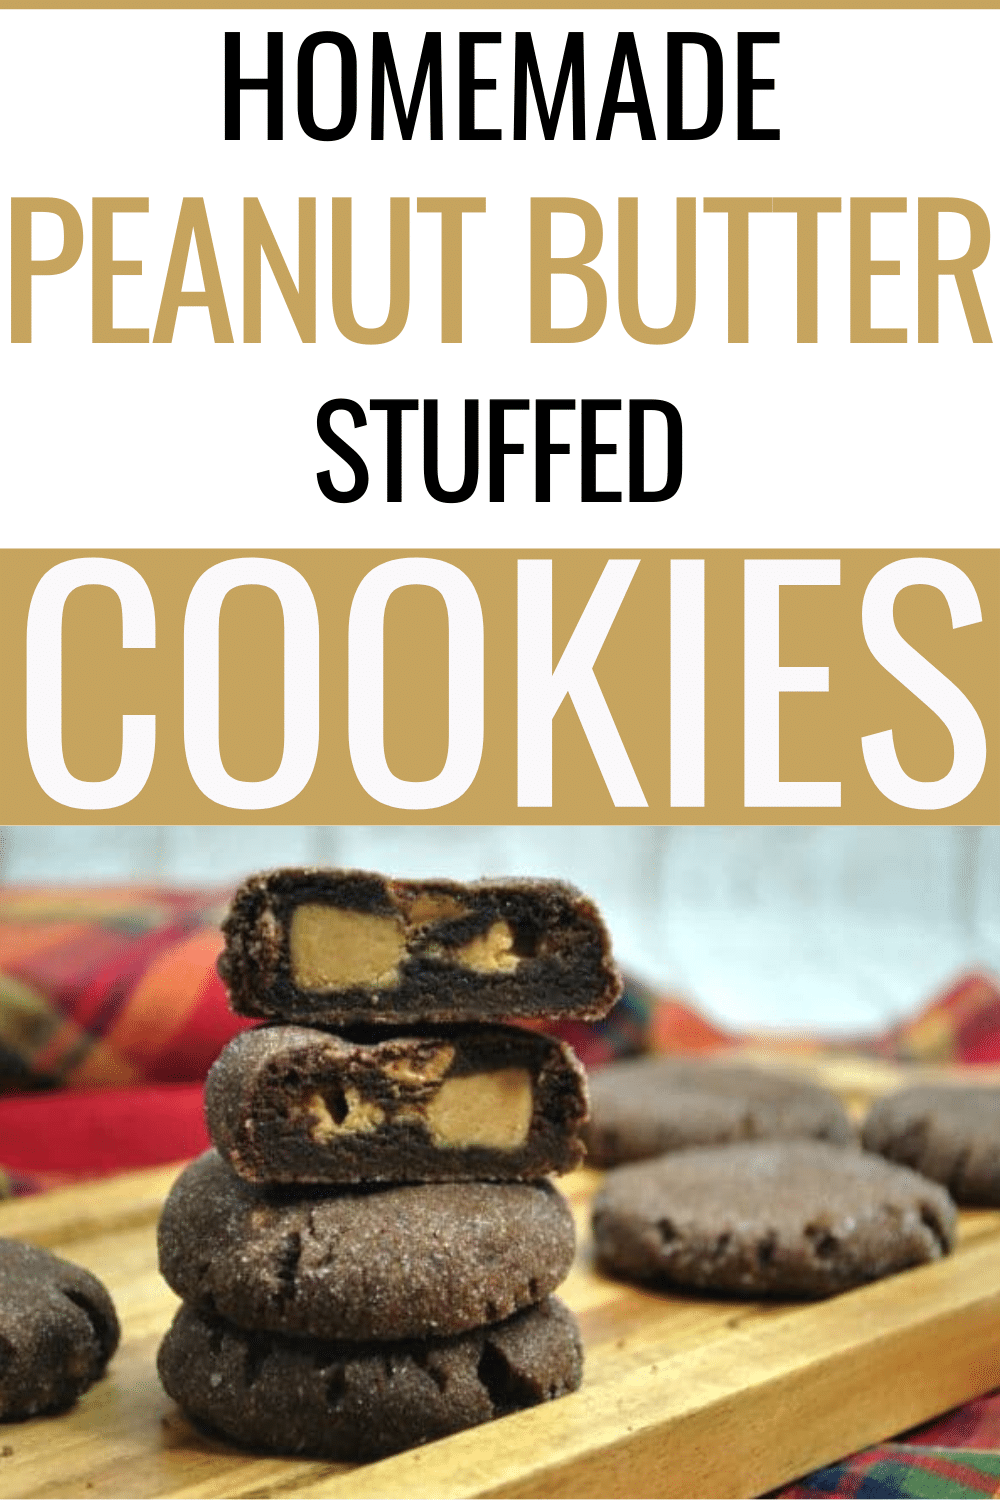 This homemade peanut butter stuffed cookie recipe will become a family favorite. Full of creamy peanut butter and chocolate these cookies are delicious. #peanutbutter #cookies #cookierecipe via @wondermomwannab